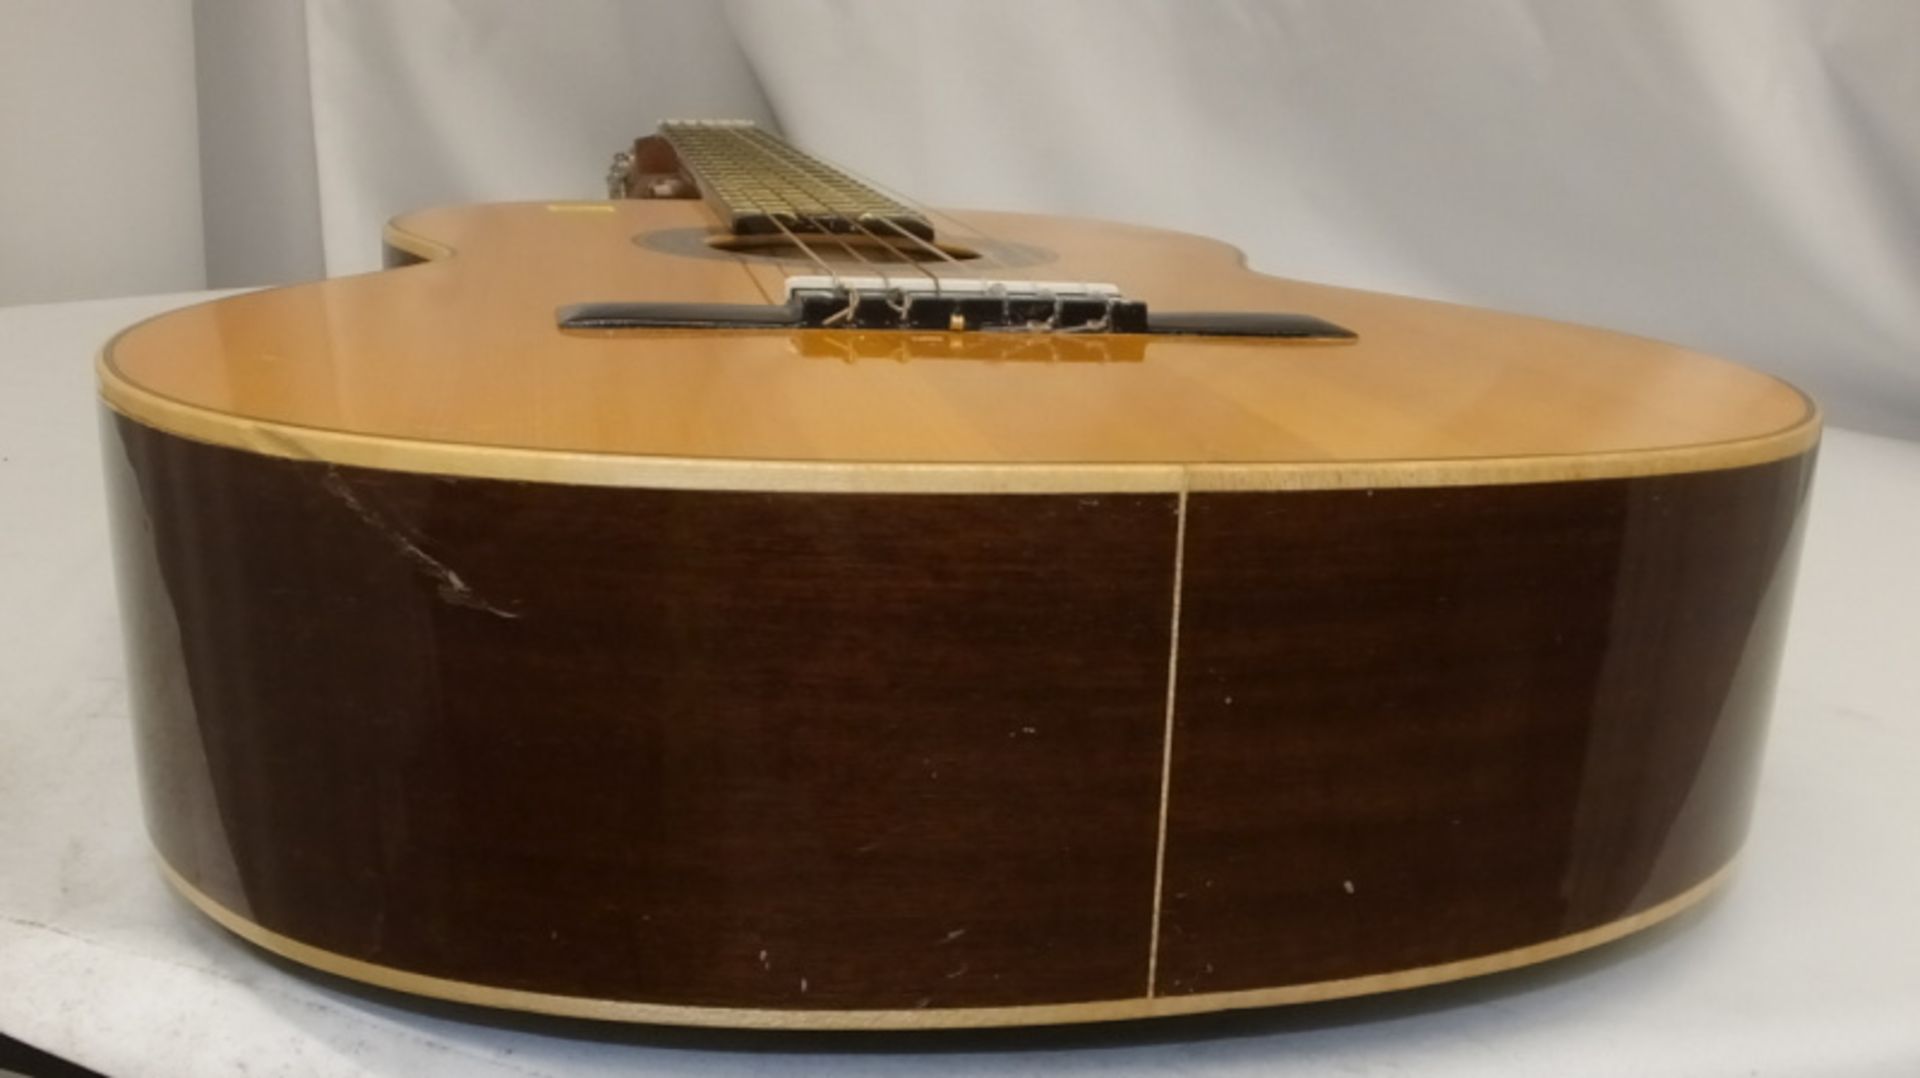 Vicente Sanchis Constructor 28s Acoustic Guitar - Image 8 of 15